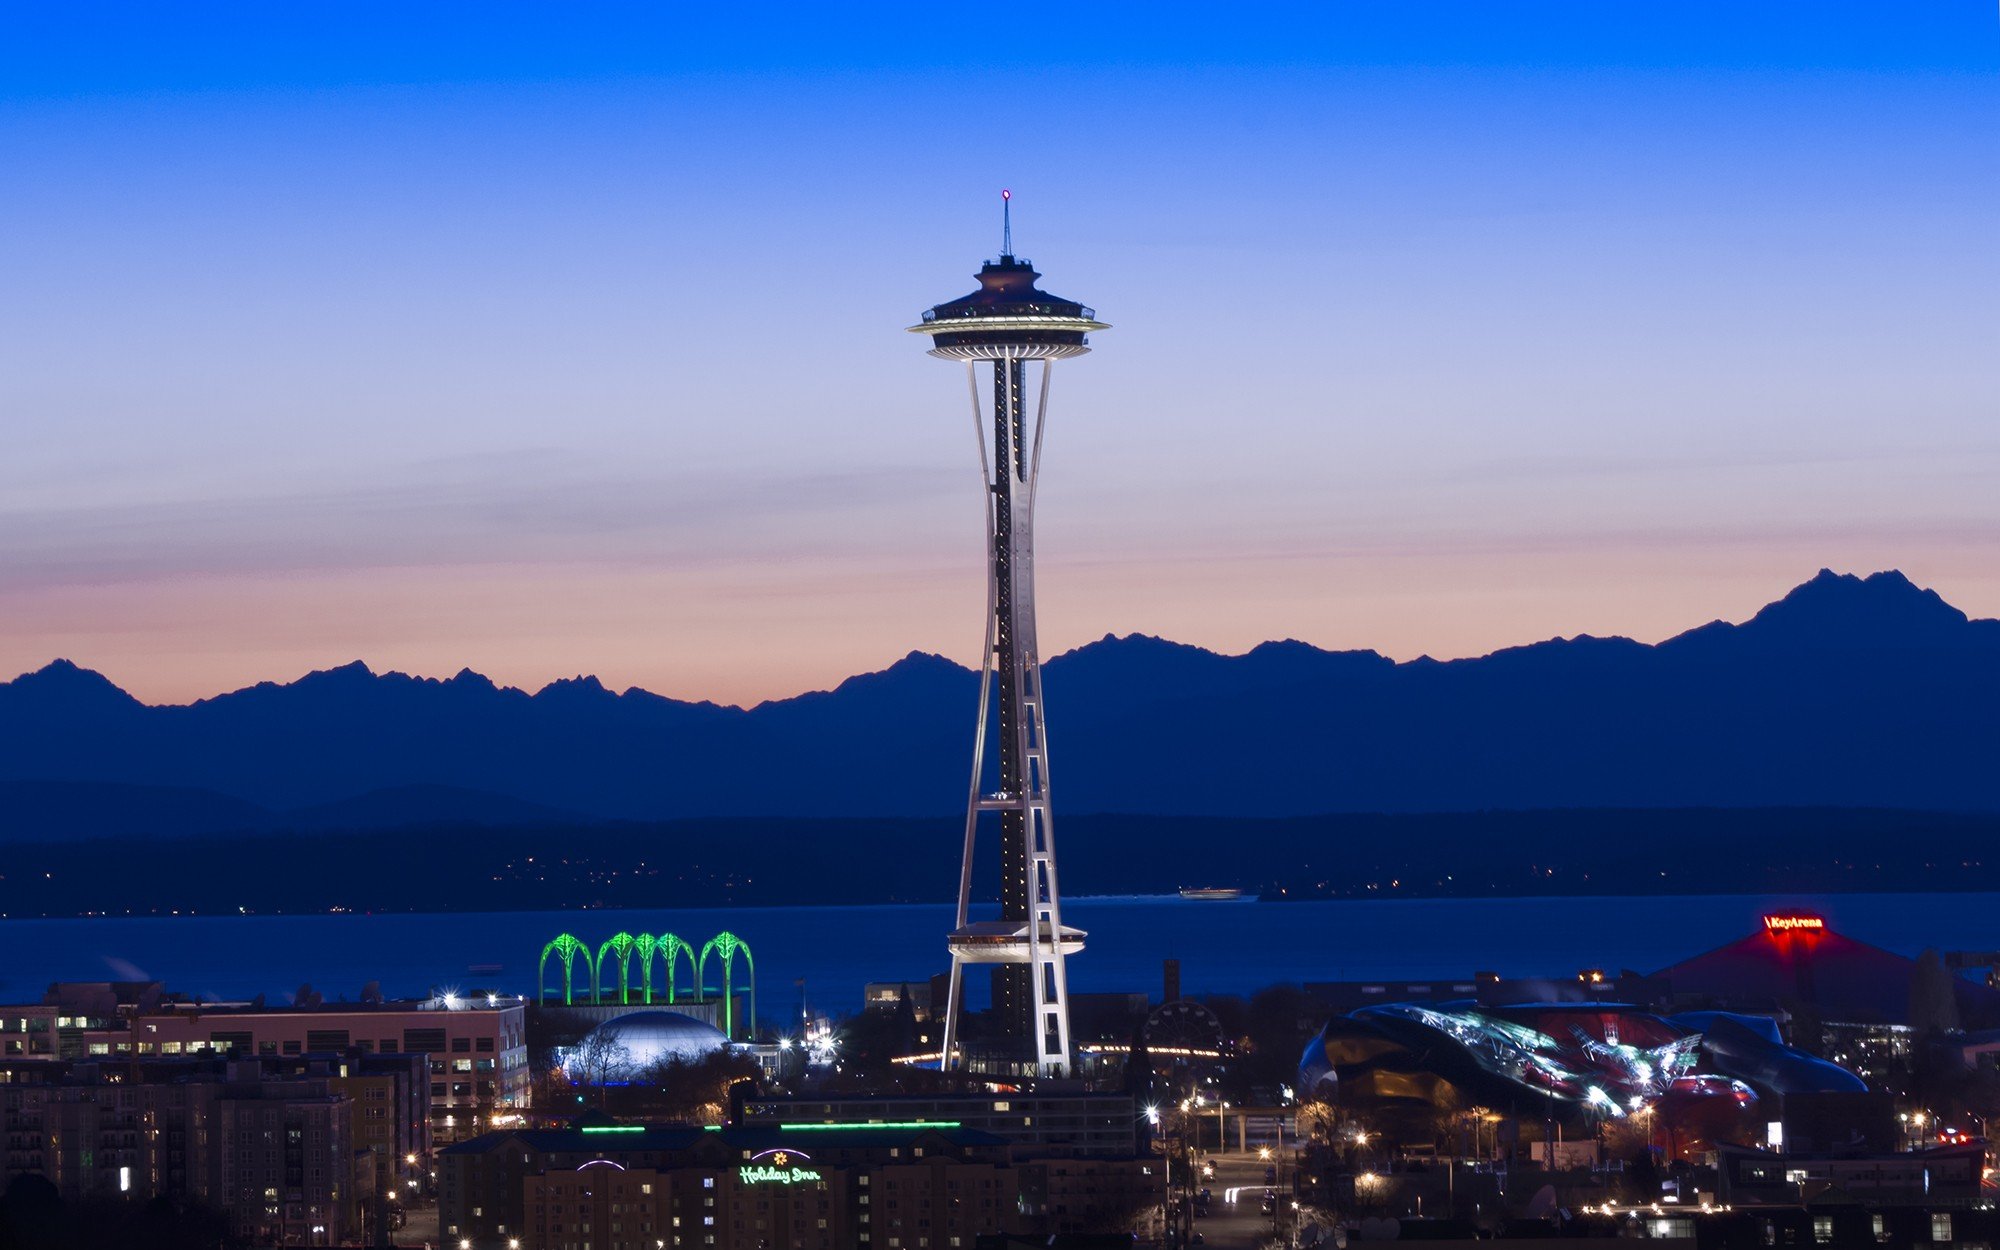 photography, Urban, City, Evening, Dusk, Sea, Water, Mountain, Seattle, Space  Needle HD Wallpapers / Desktop and Mobile Images & Photos